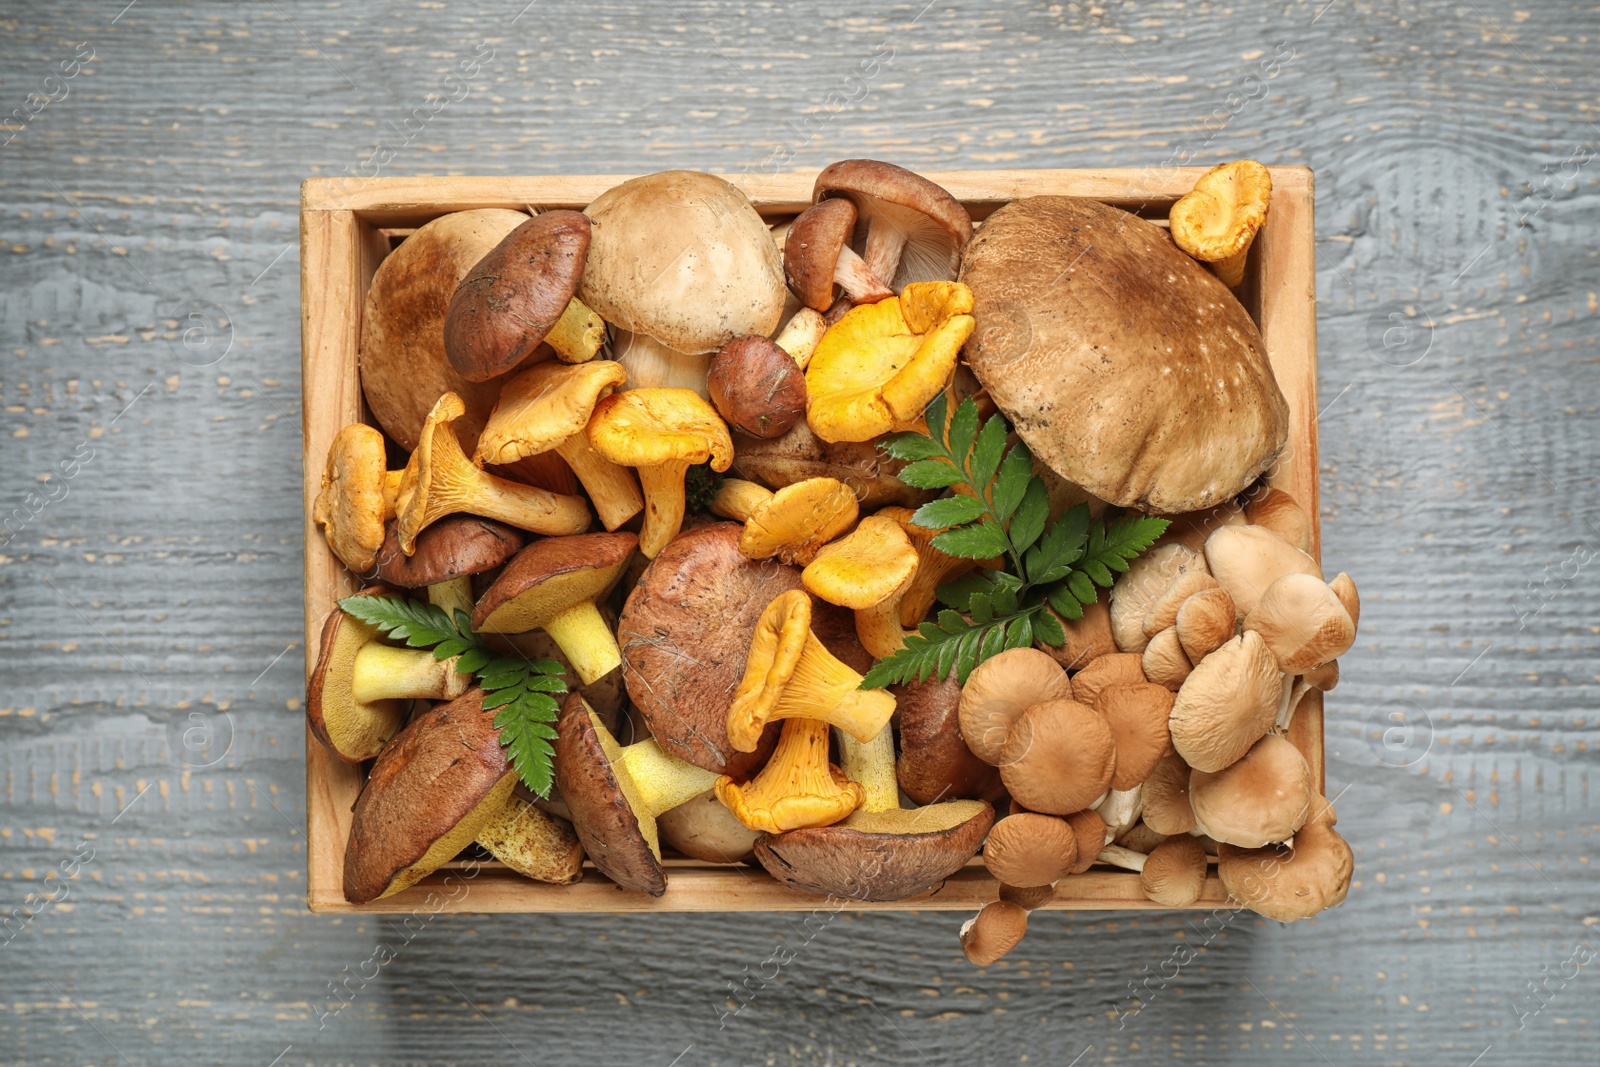 Photo of Box with different mushrooms on grey wooden background, top view